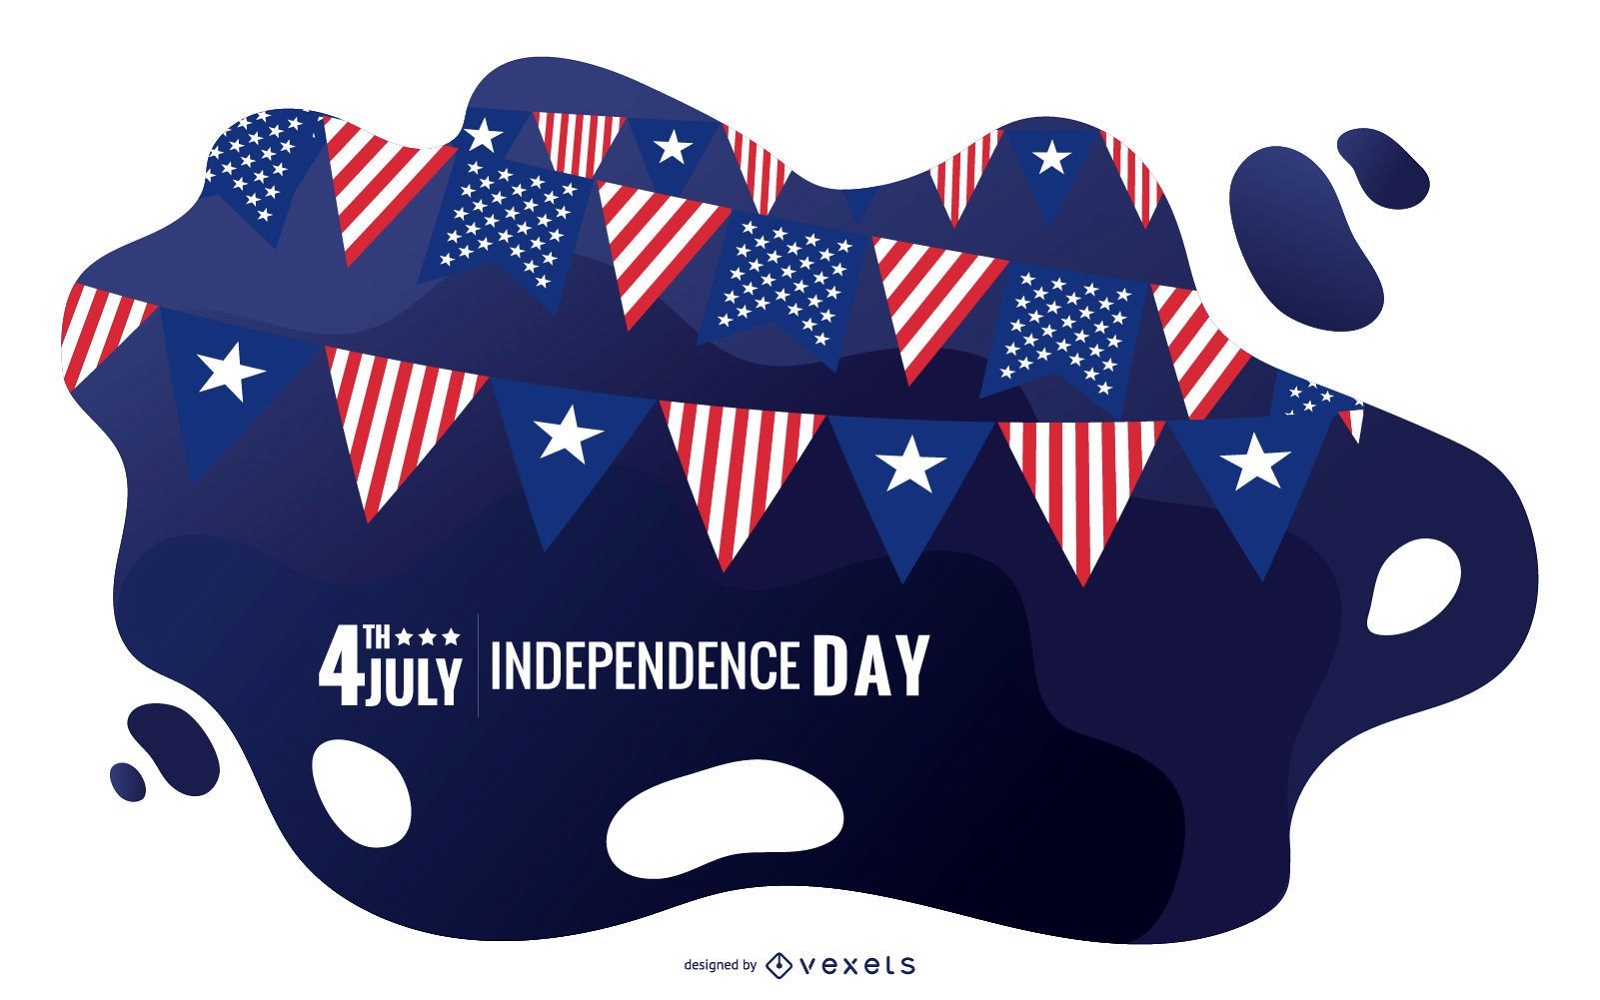 USA Independence Day Illustration